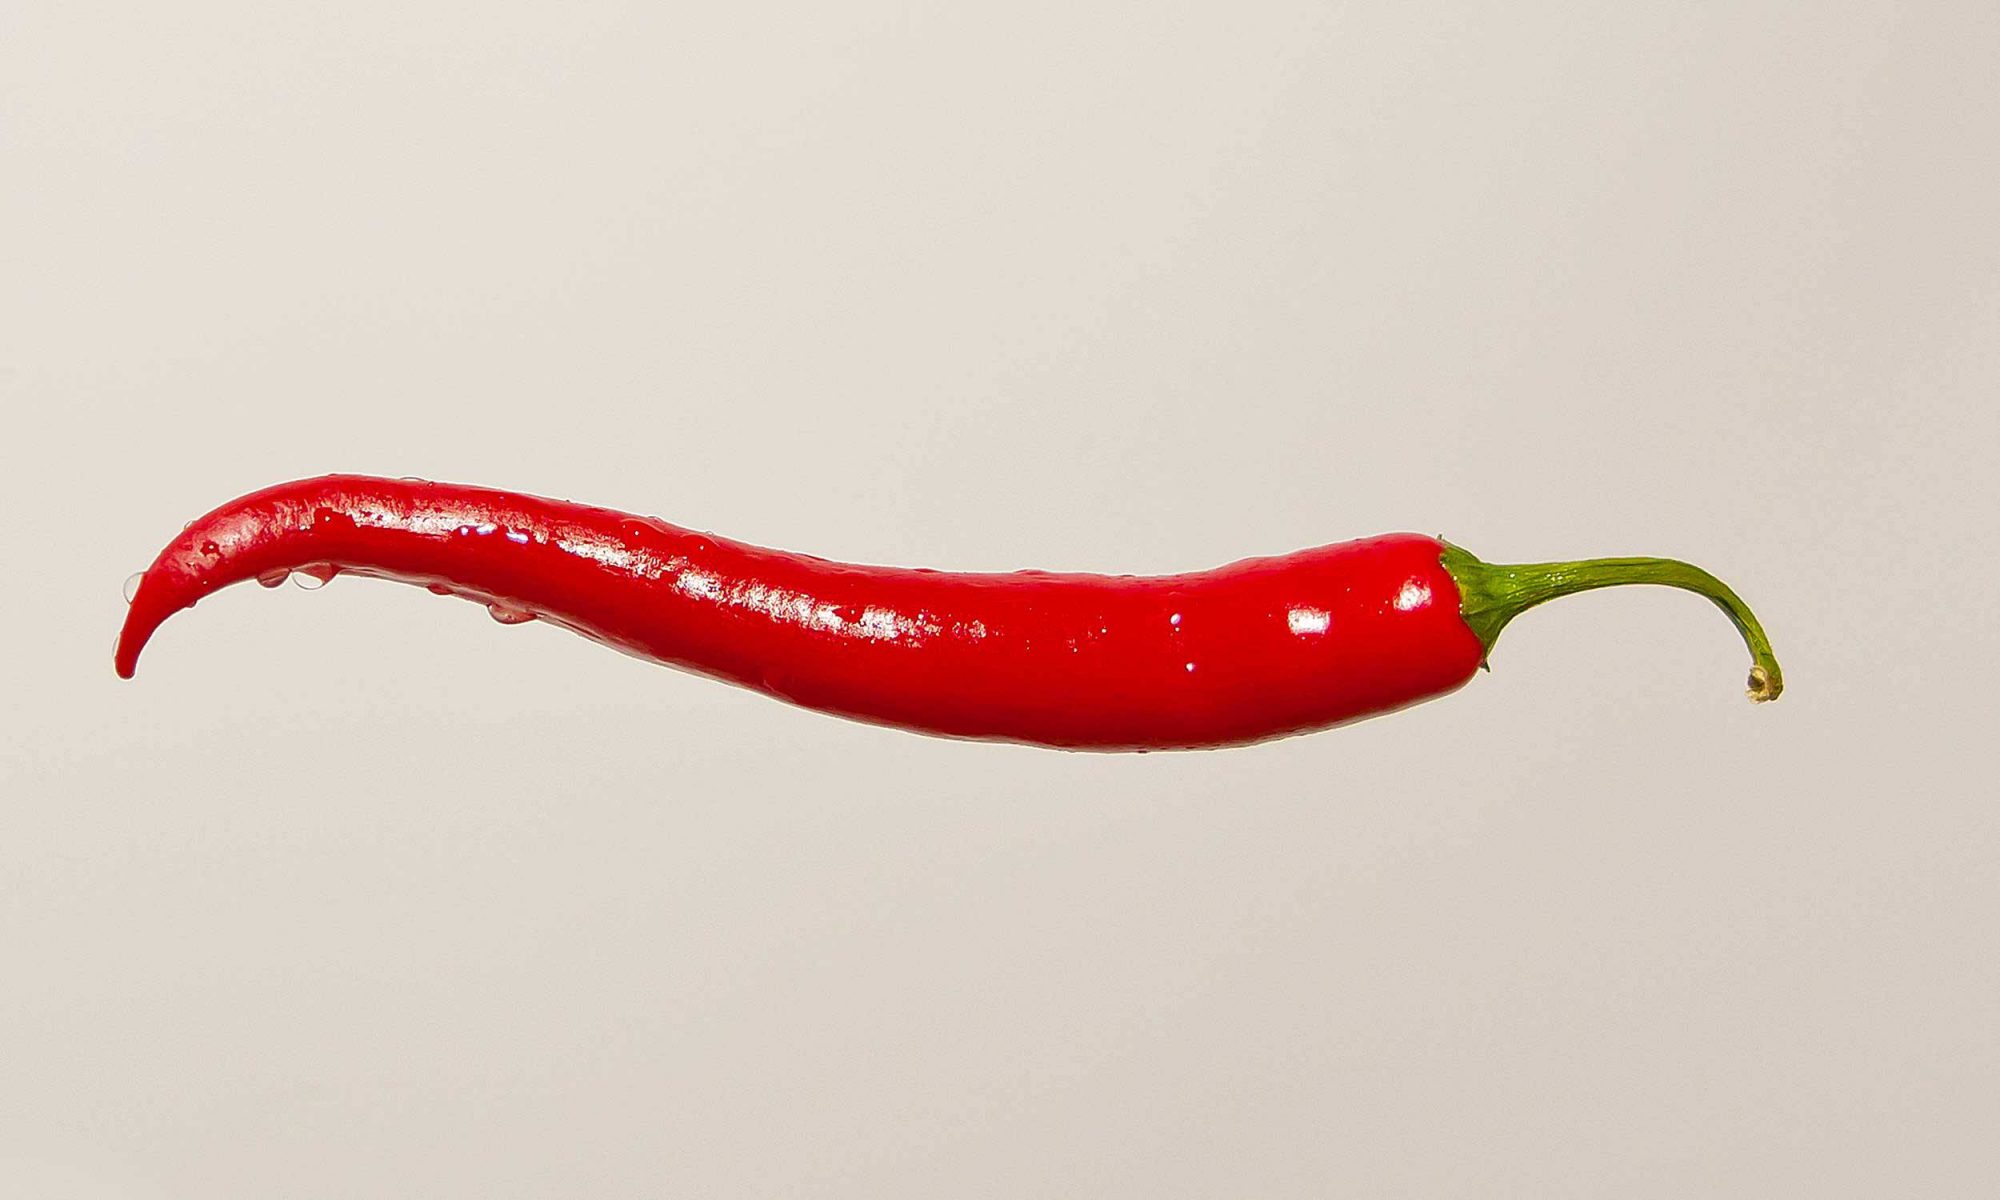 EC: The Psychological Reason Why People Hate Spicy Foods